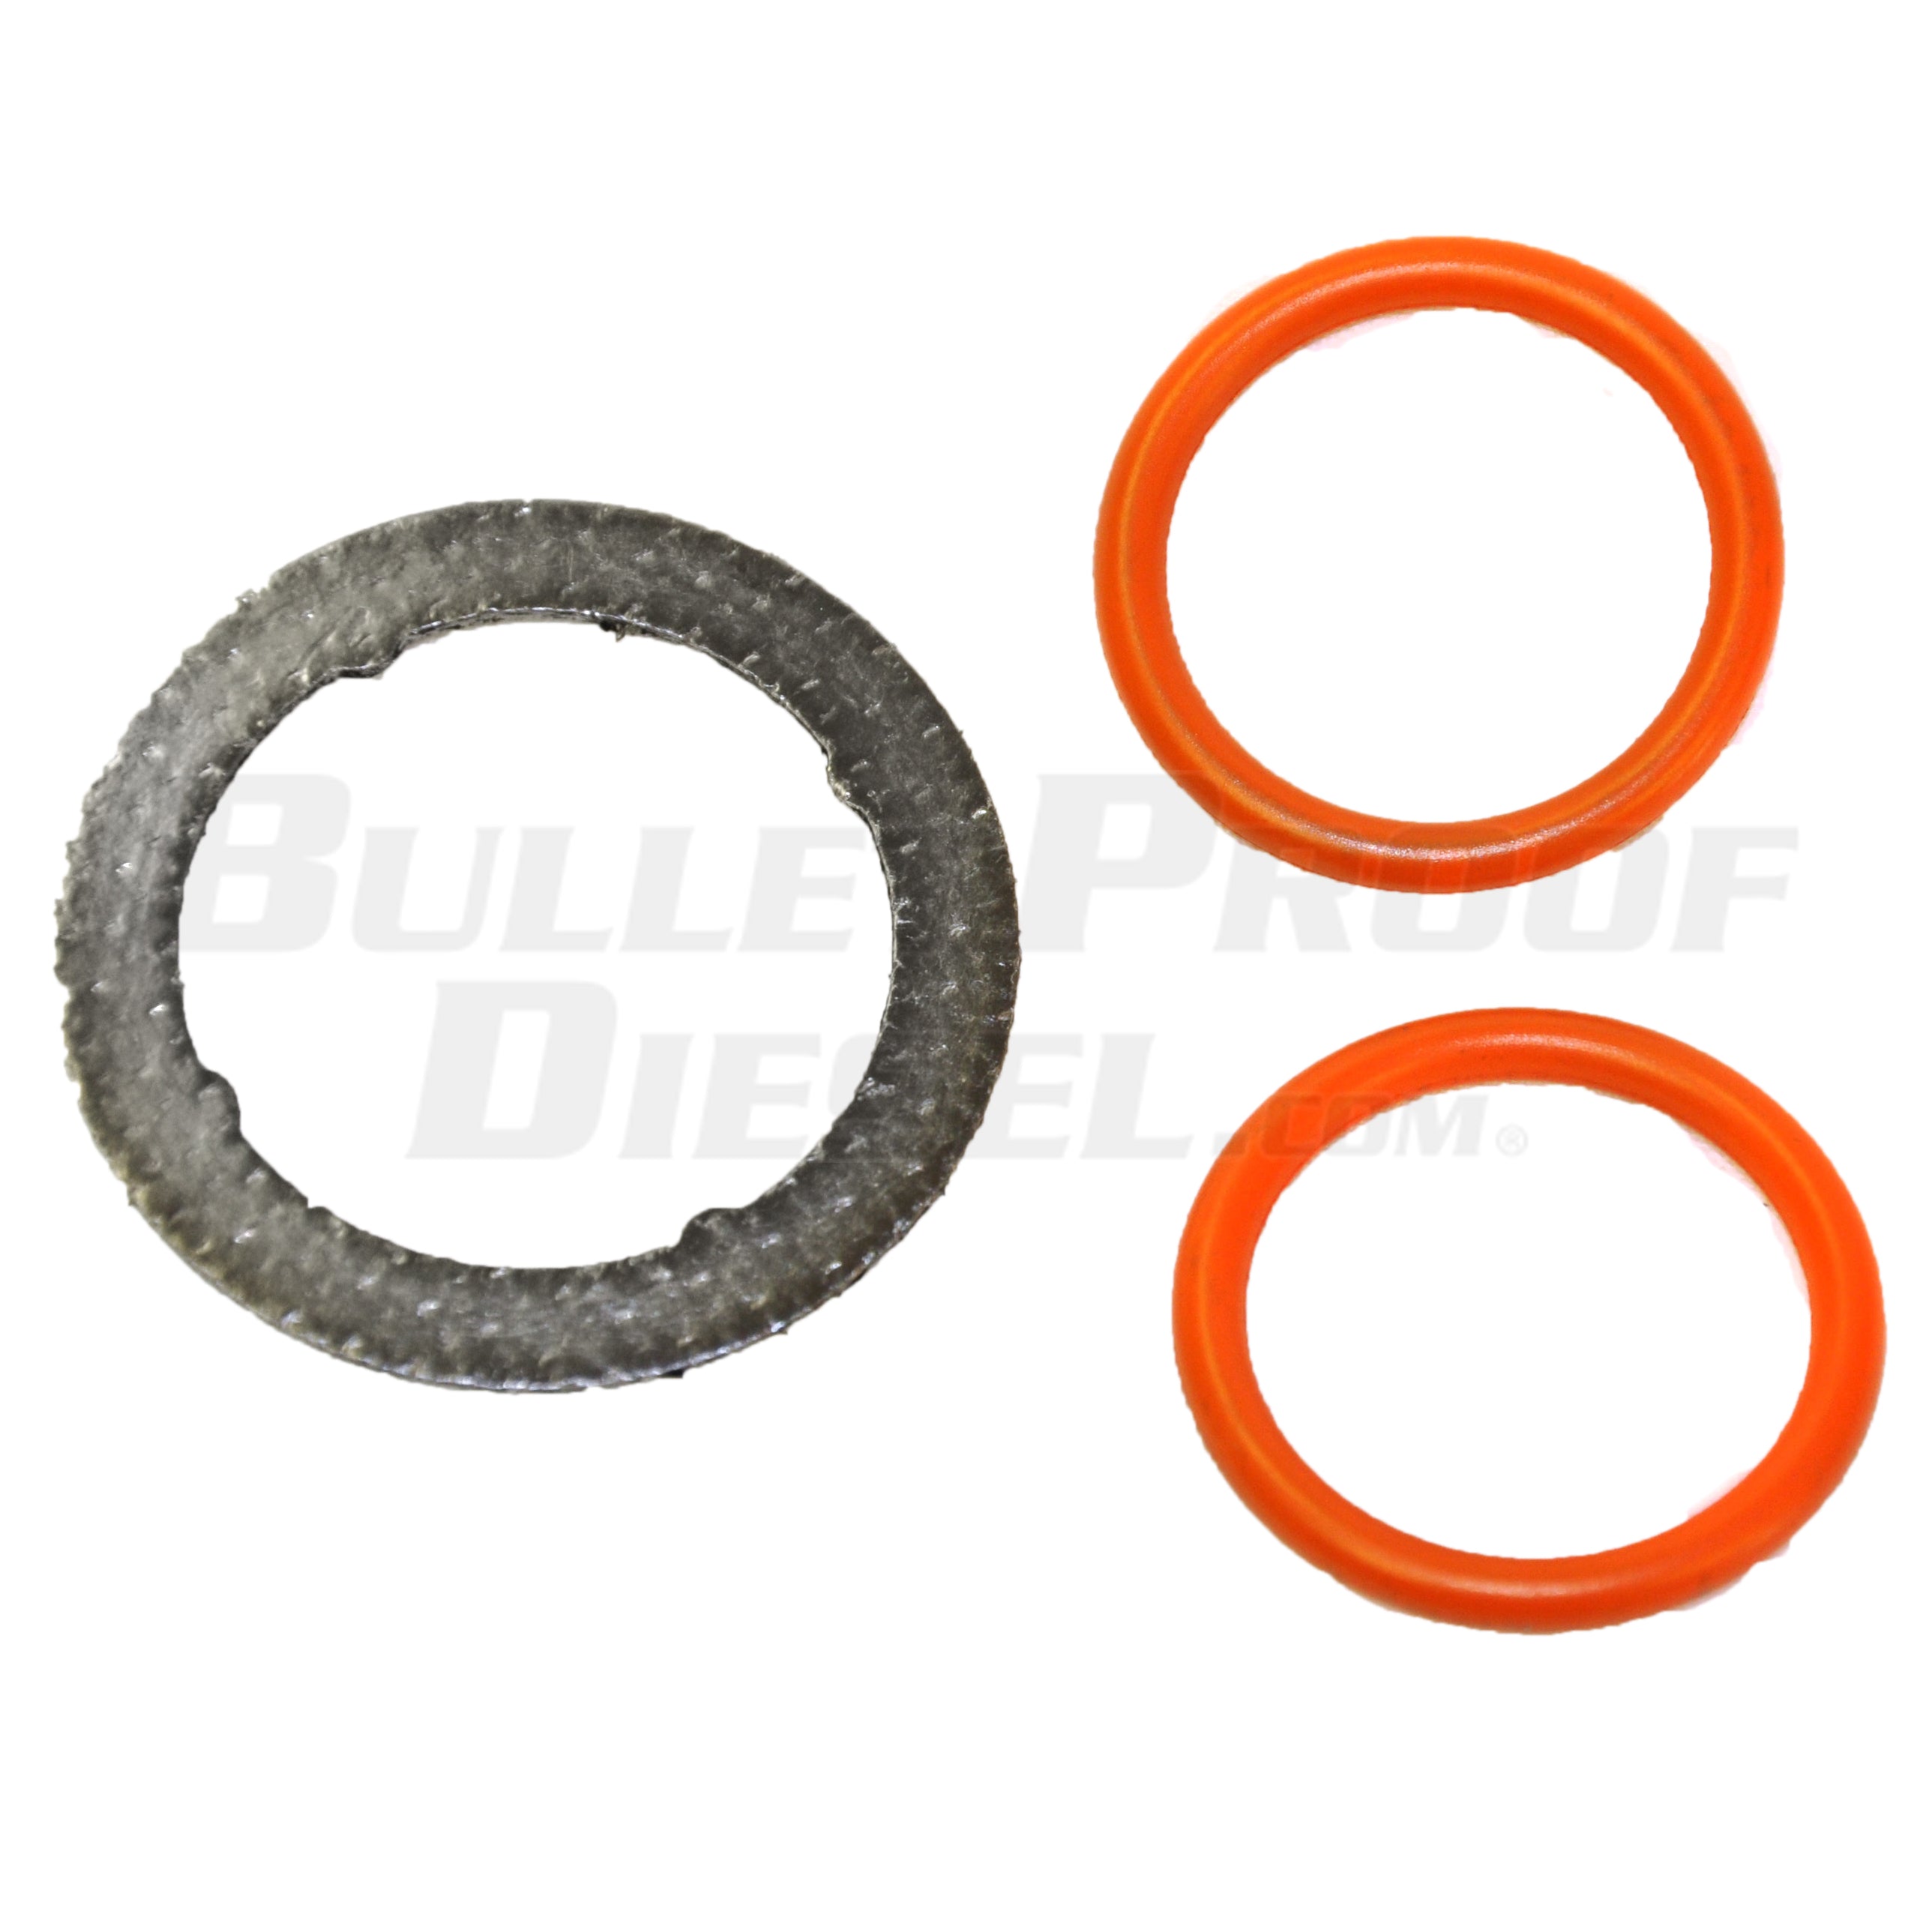 2007 6.0L F-Series, Professional Package - OEM Oil Filter